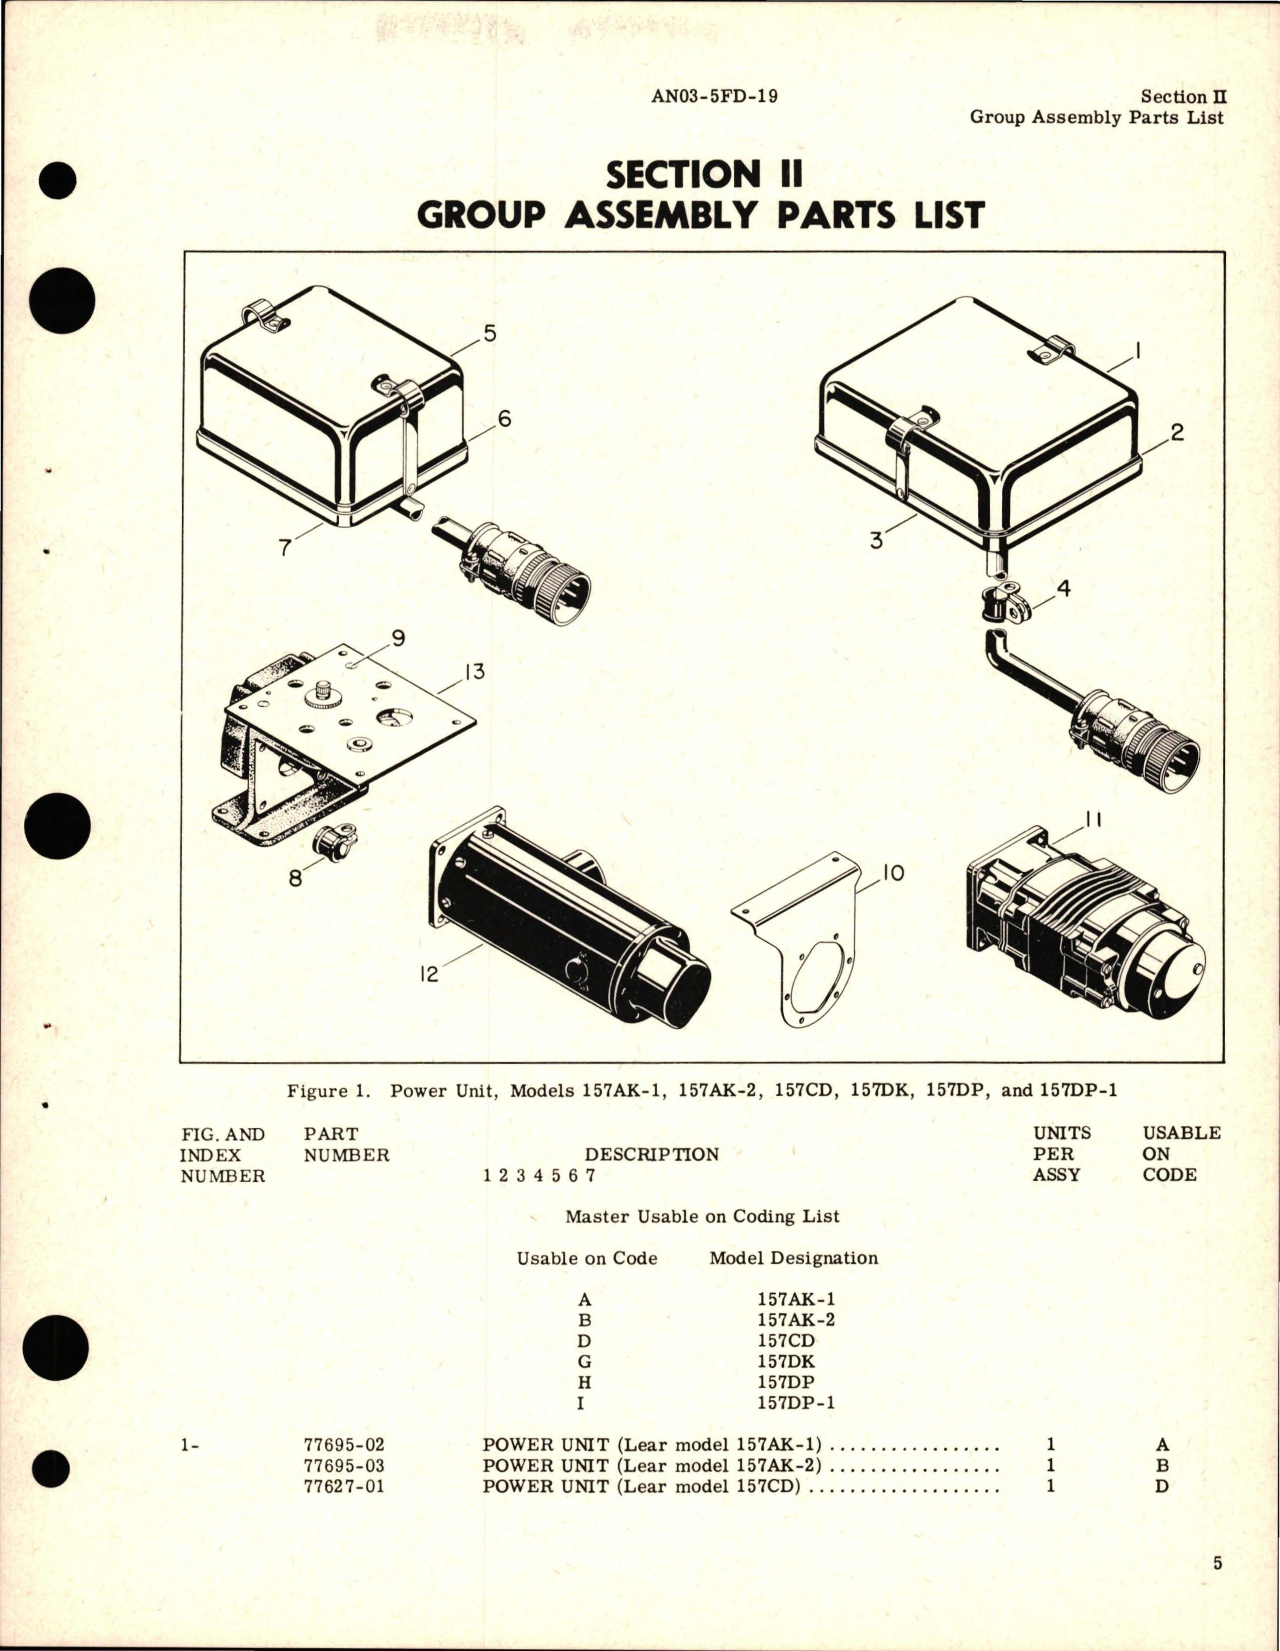 Sample page 7 from AirCorps Library document: Illustrated Parts Breakdown for Power Unit 